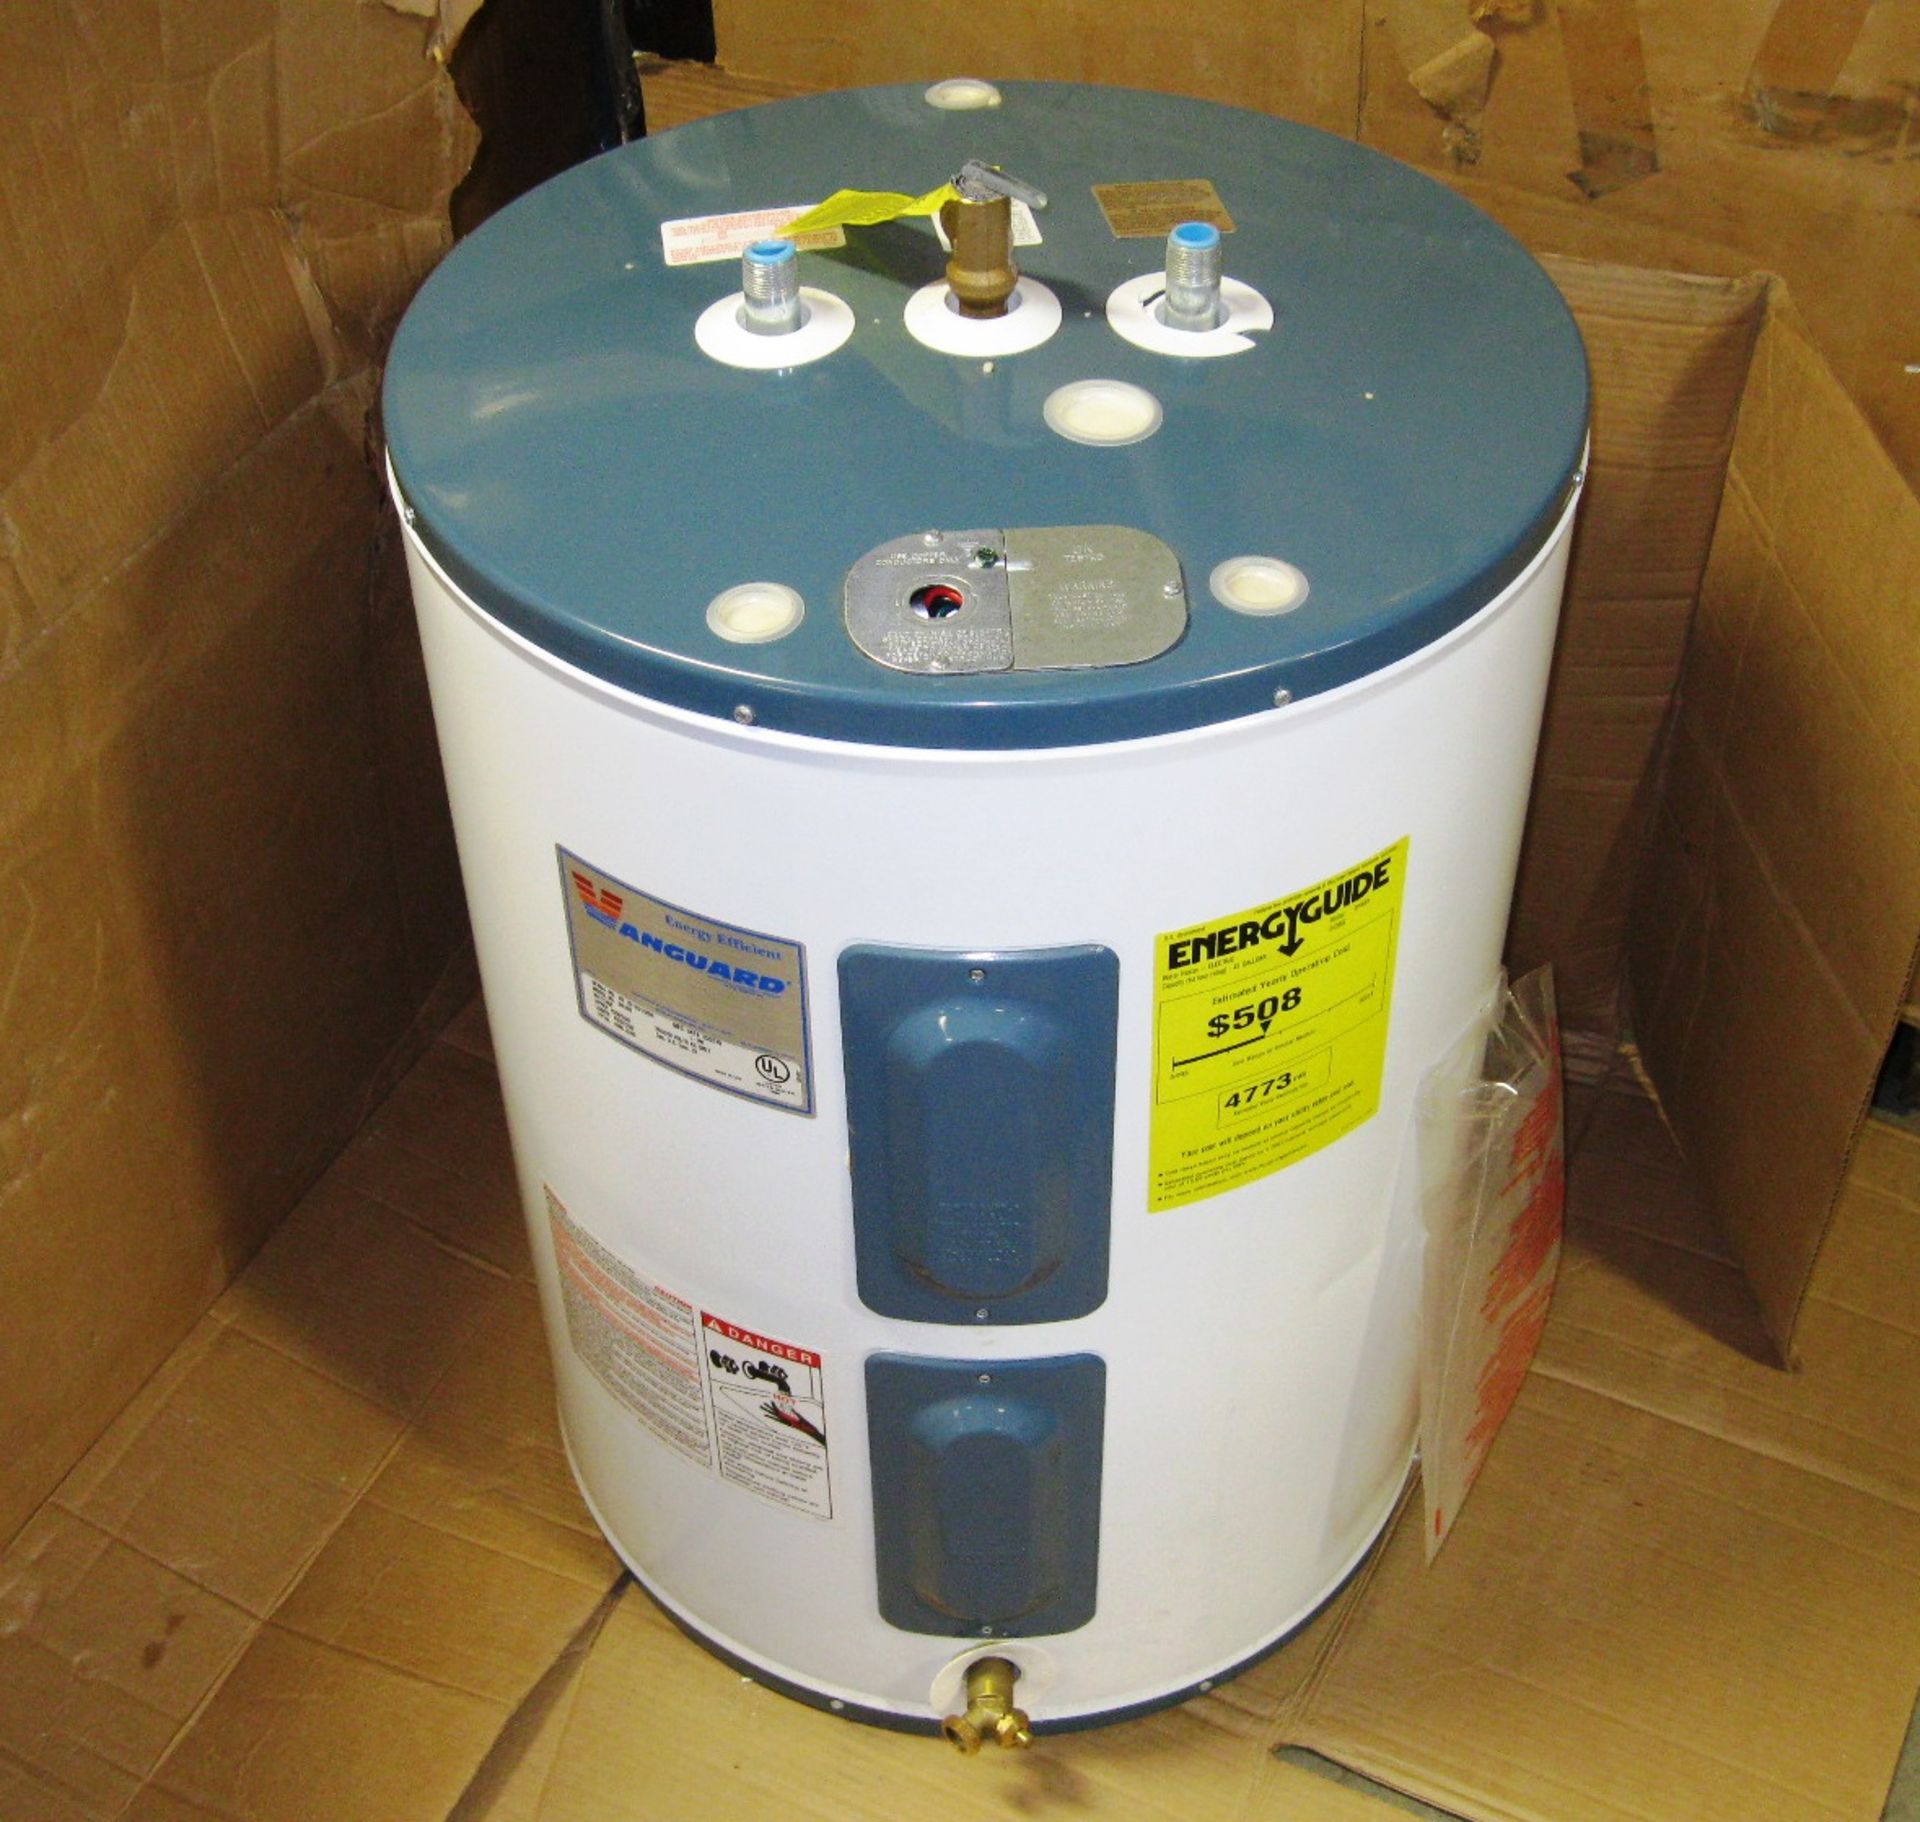 Vanguard 38 Gallon Residential Electric Water Heater 240VAC 3WA69   Condition: New Manufacturer: